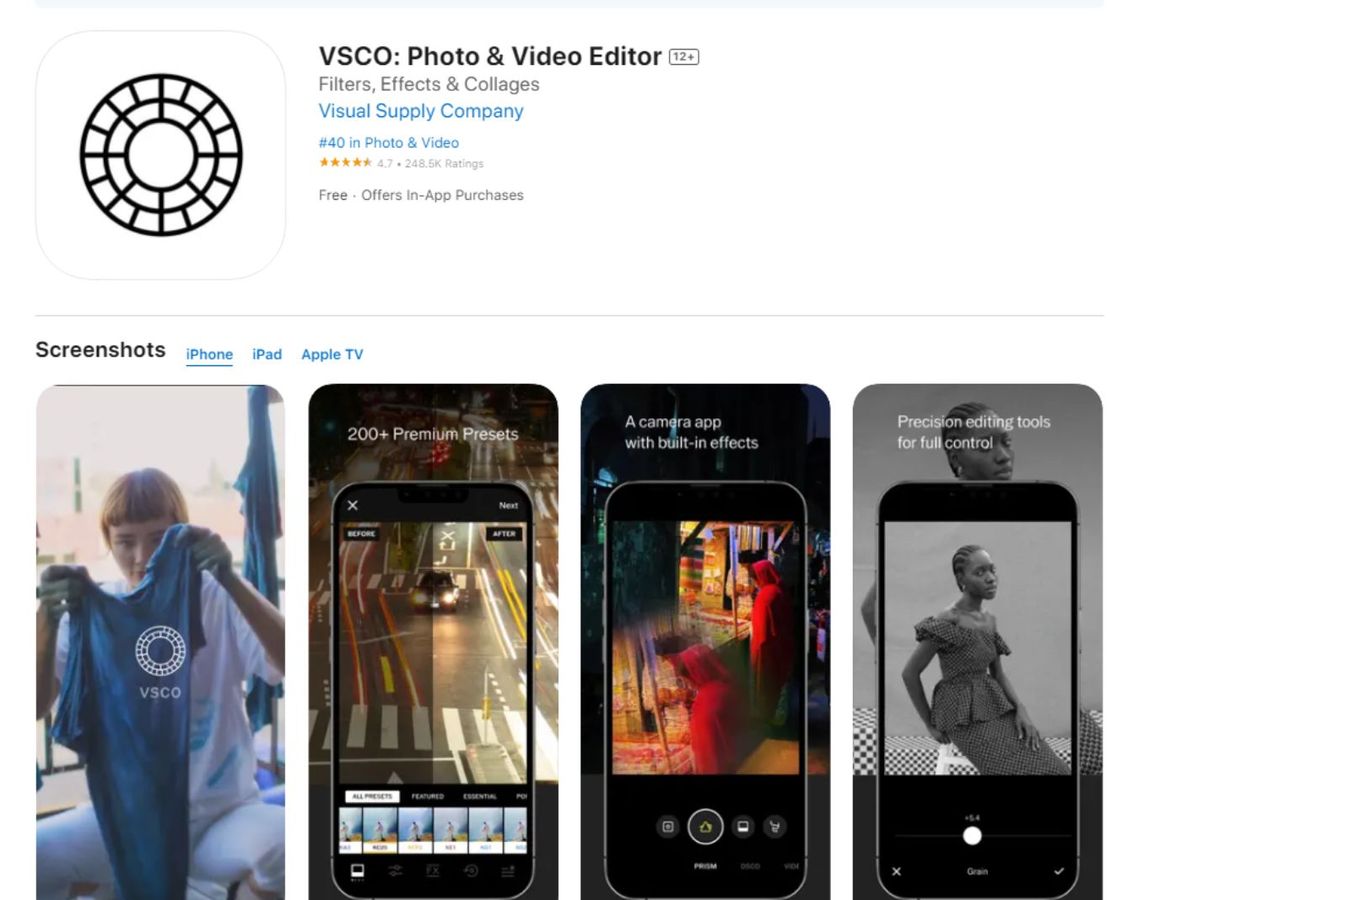  The best photoshop apps for iPhone